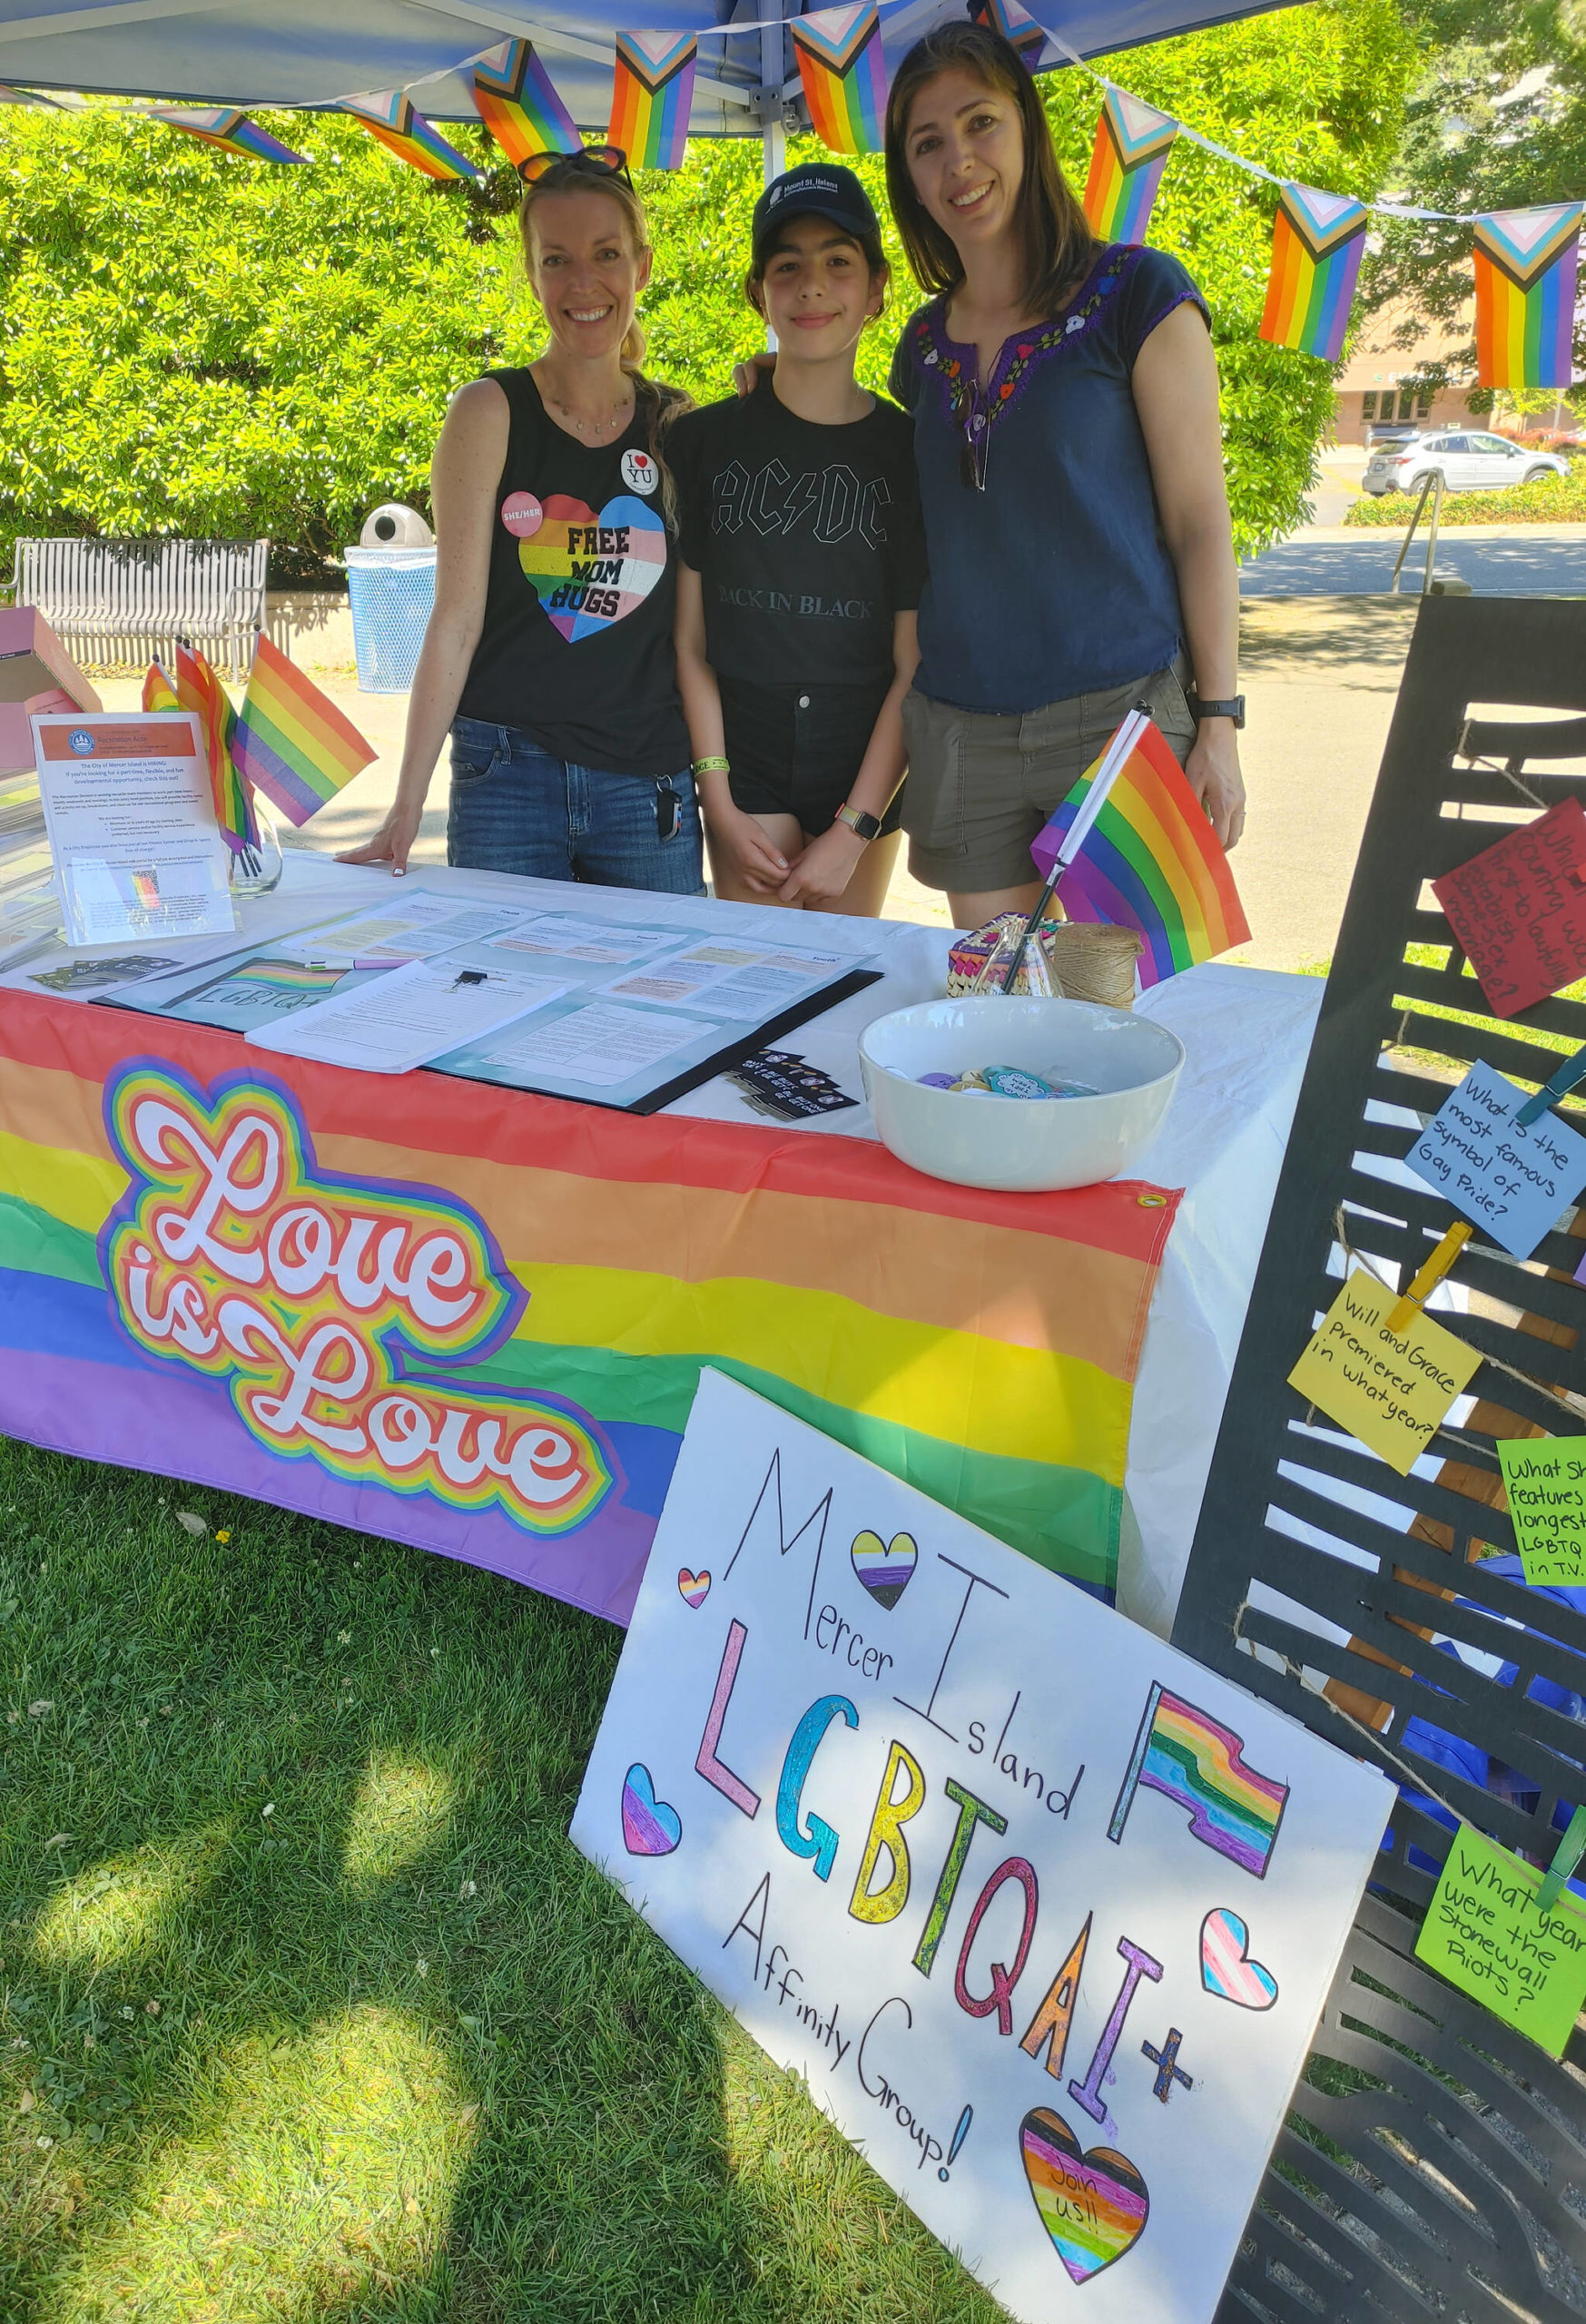 LGBTQ+ Families Affinity Group members, from left, Jaymee Lundin, Pia Santana and Cristina Martinez stand at their booth during the Mercer Island Pride Celebration on June 26. Andy Nystrom/ staff photo